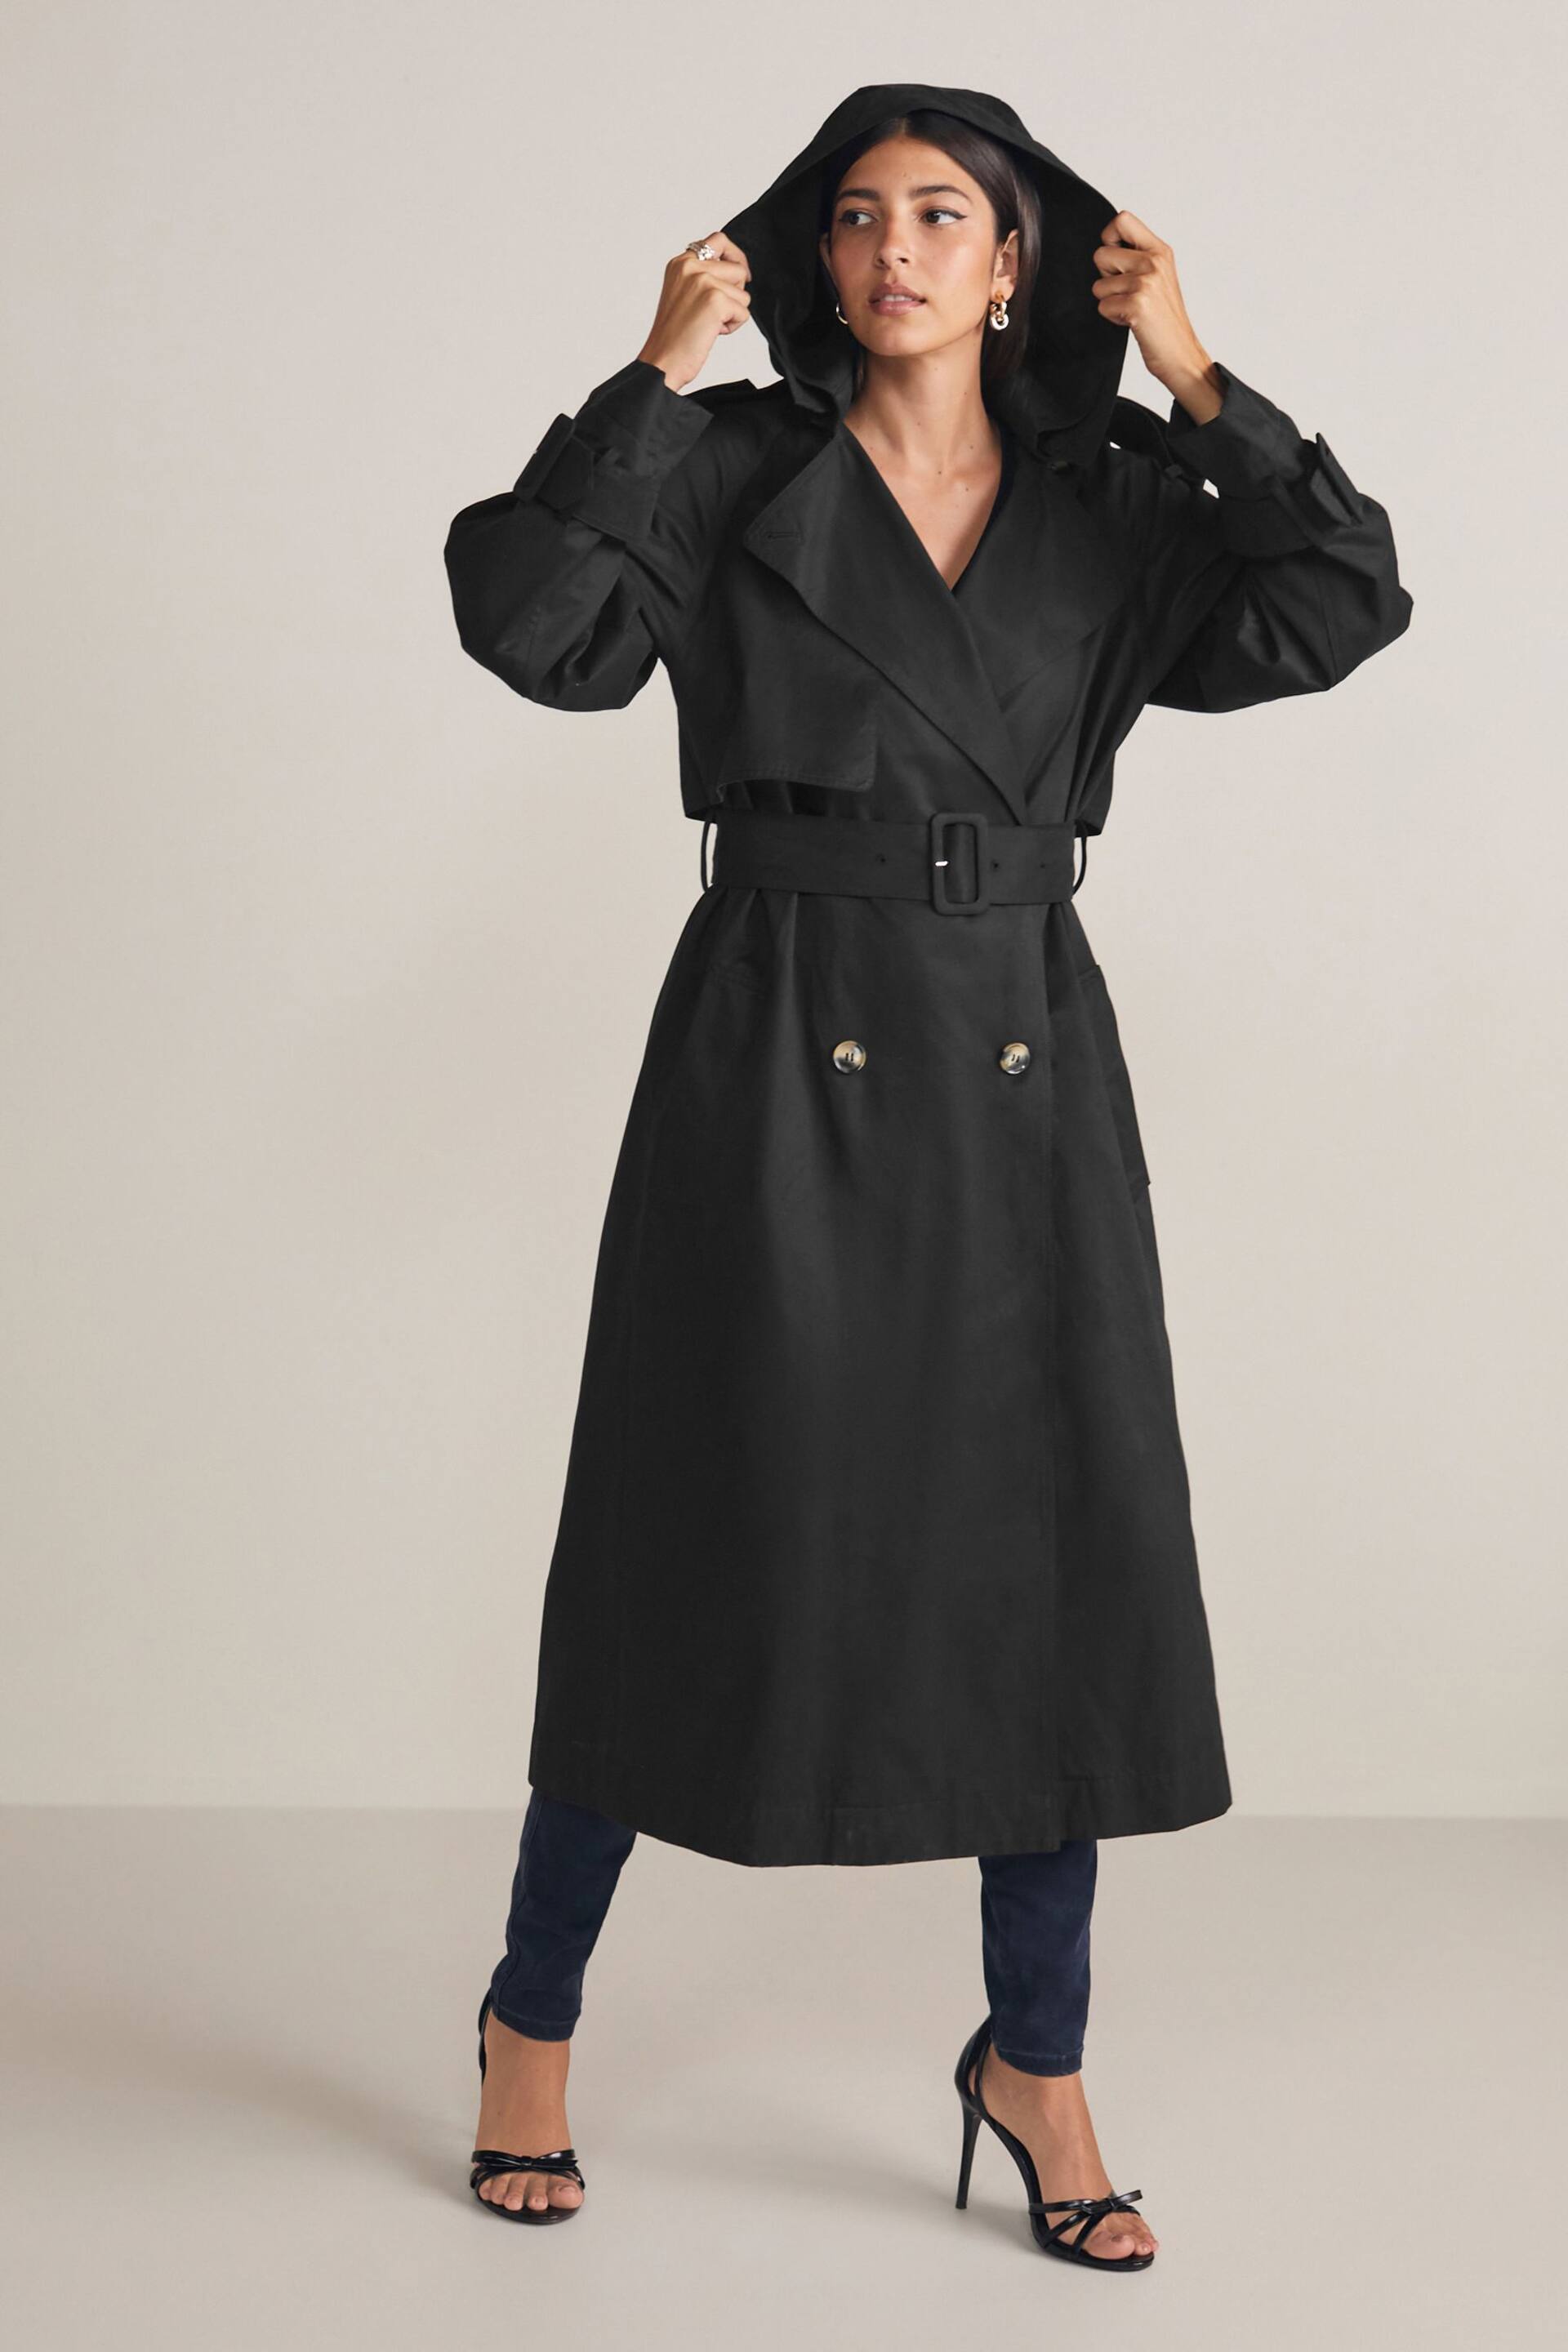 Black Belted Trench Coat - Image 2 of 9